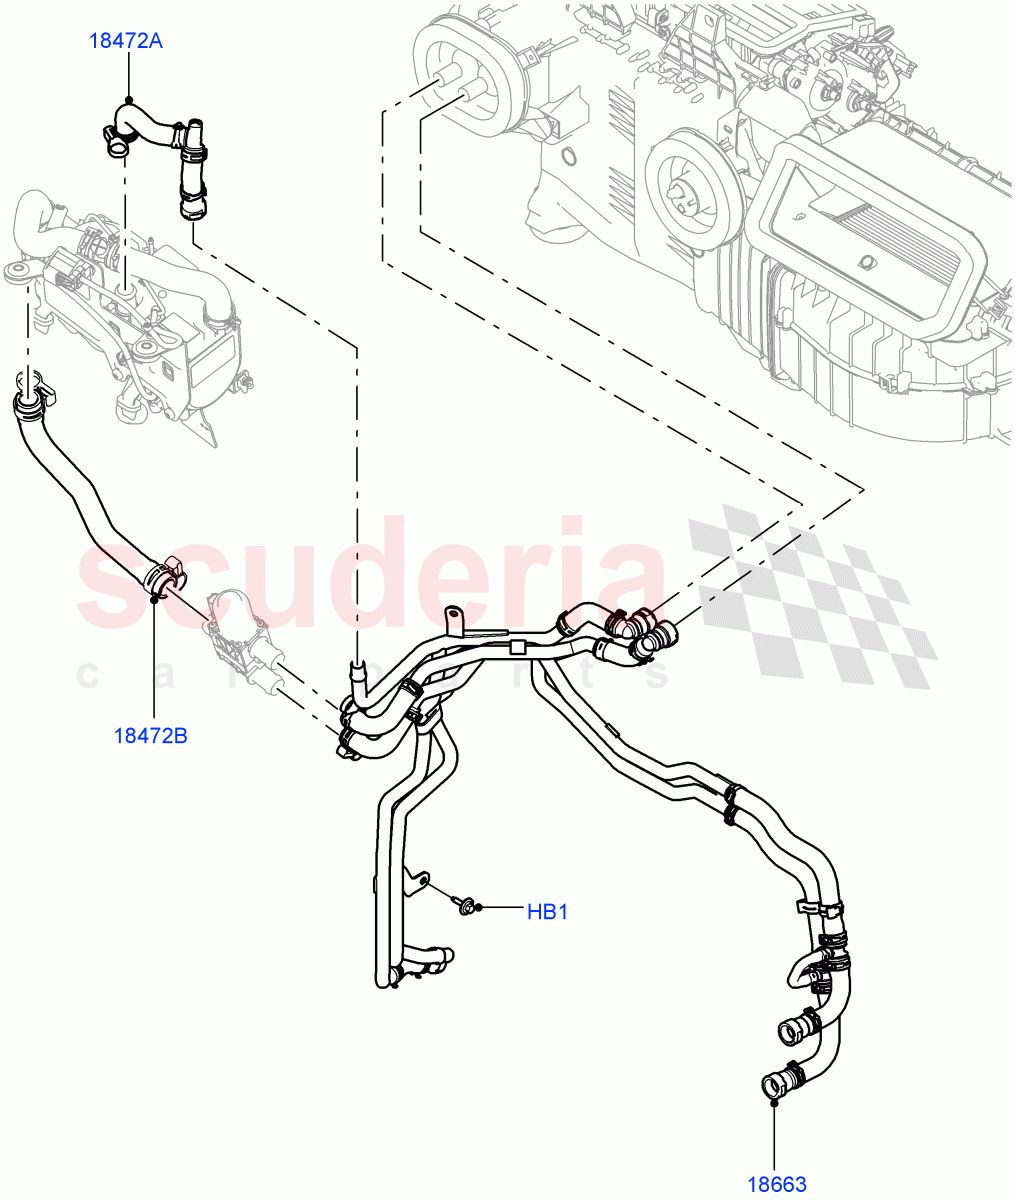 Heater Hoses(Front)(2.0L I4 DSL HIGH DOHC AJ200,With Fuel Fired Heater,With Air Conditioning - Front/Rear,Park Heating With Remote Control)((V)FROMHA000001,(V)TOHA999999) of Land Rover Land Rover Range Rover Sport (2014+) [3.0 Diesel 24V DOHC TC]